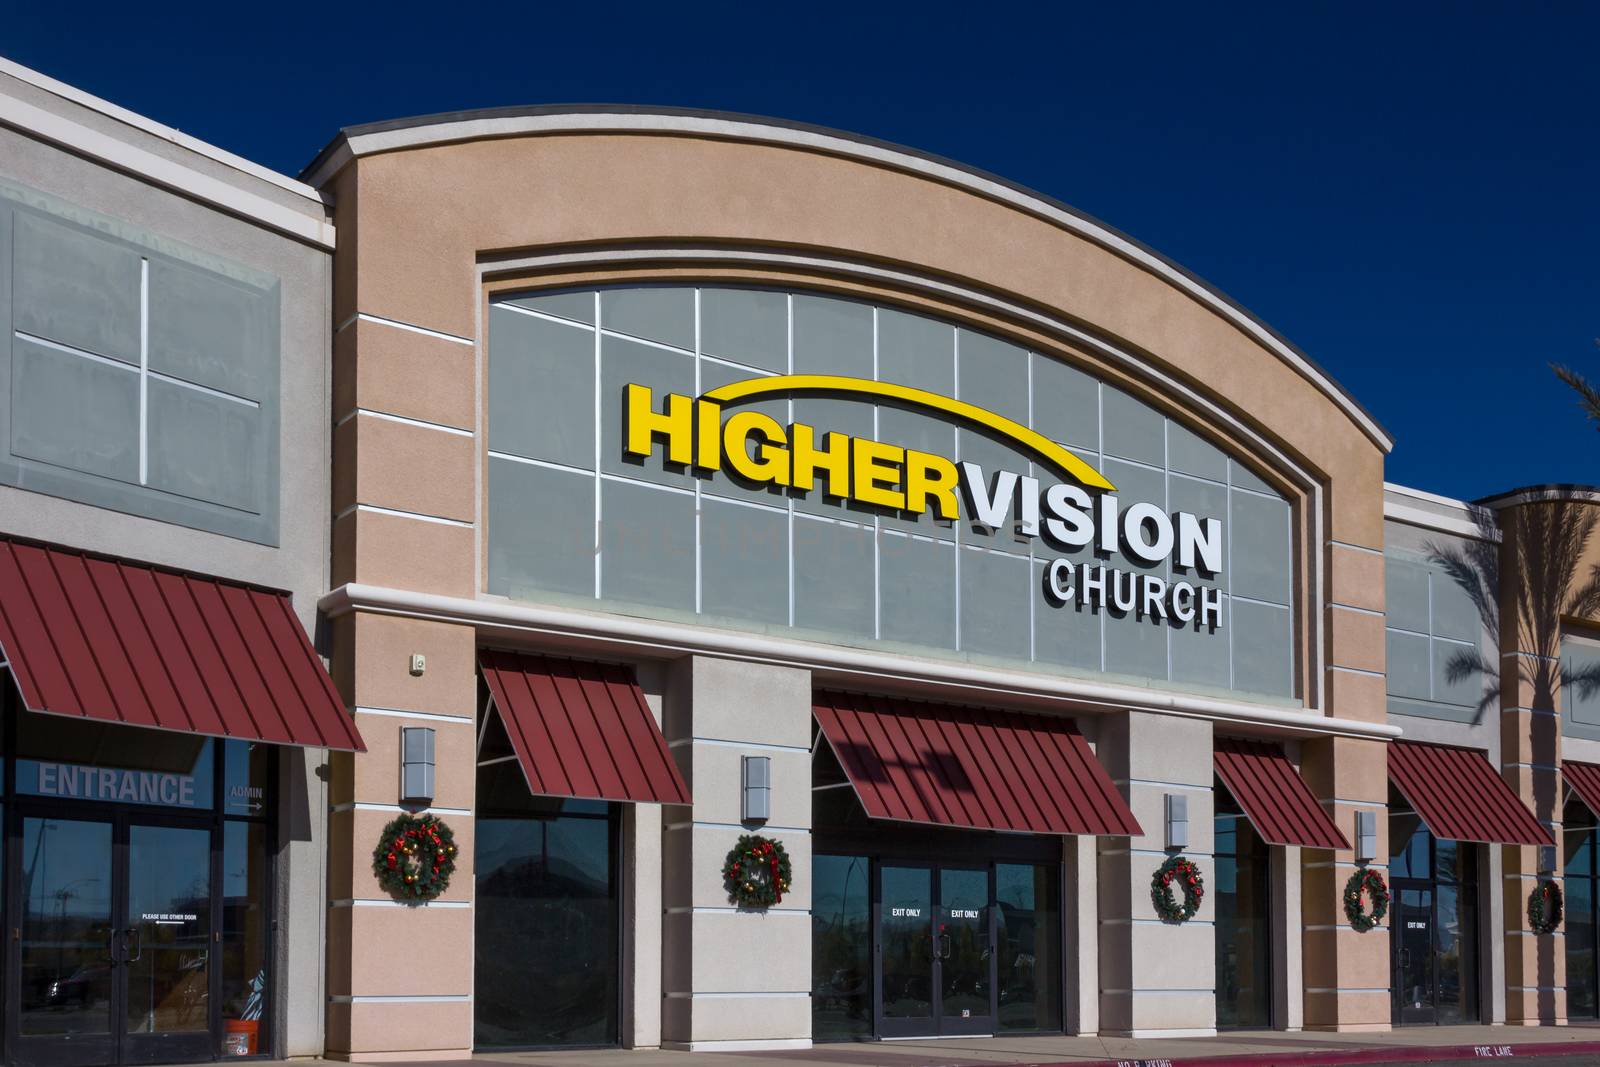 VALENCIA CA/USA - DECEMBER 26, 2015: Higher Vision exterior and logo. Higher Vision church is a non-demoninational Christian church in the United States.